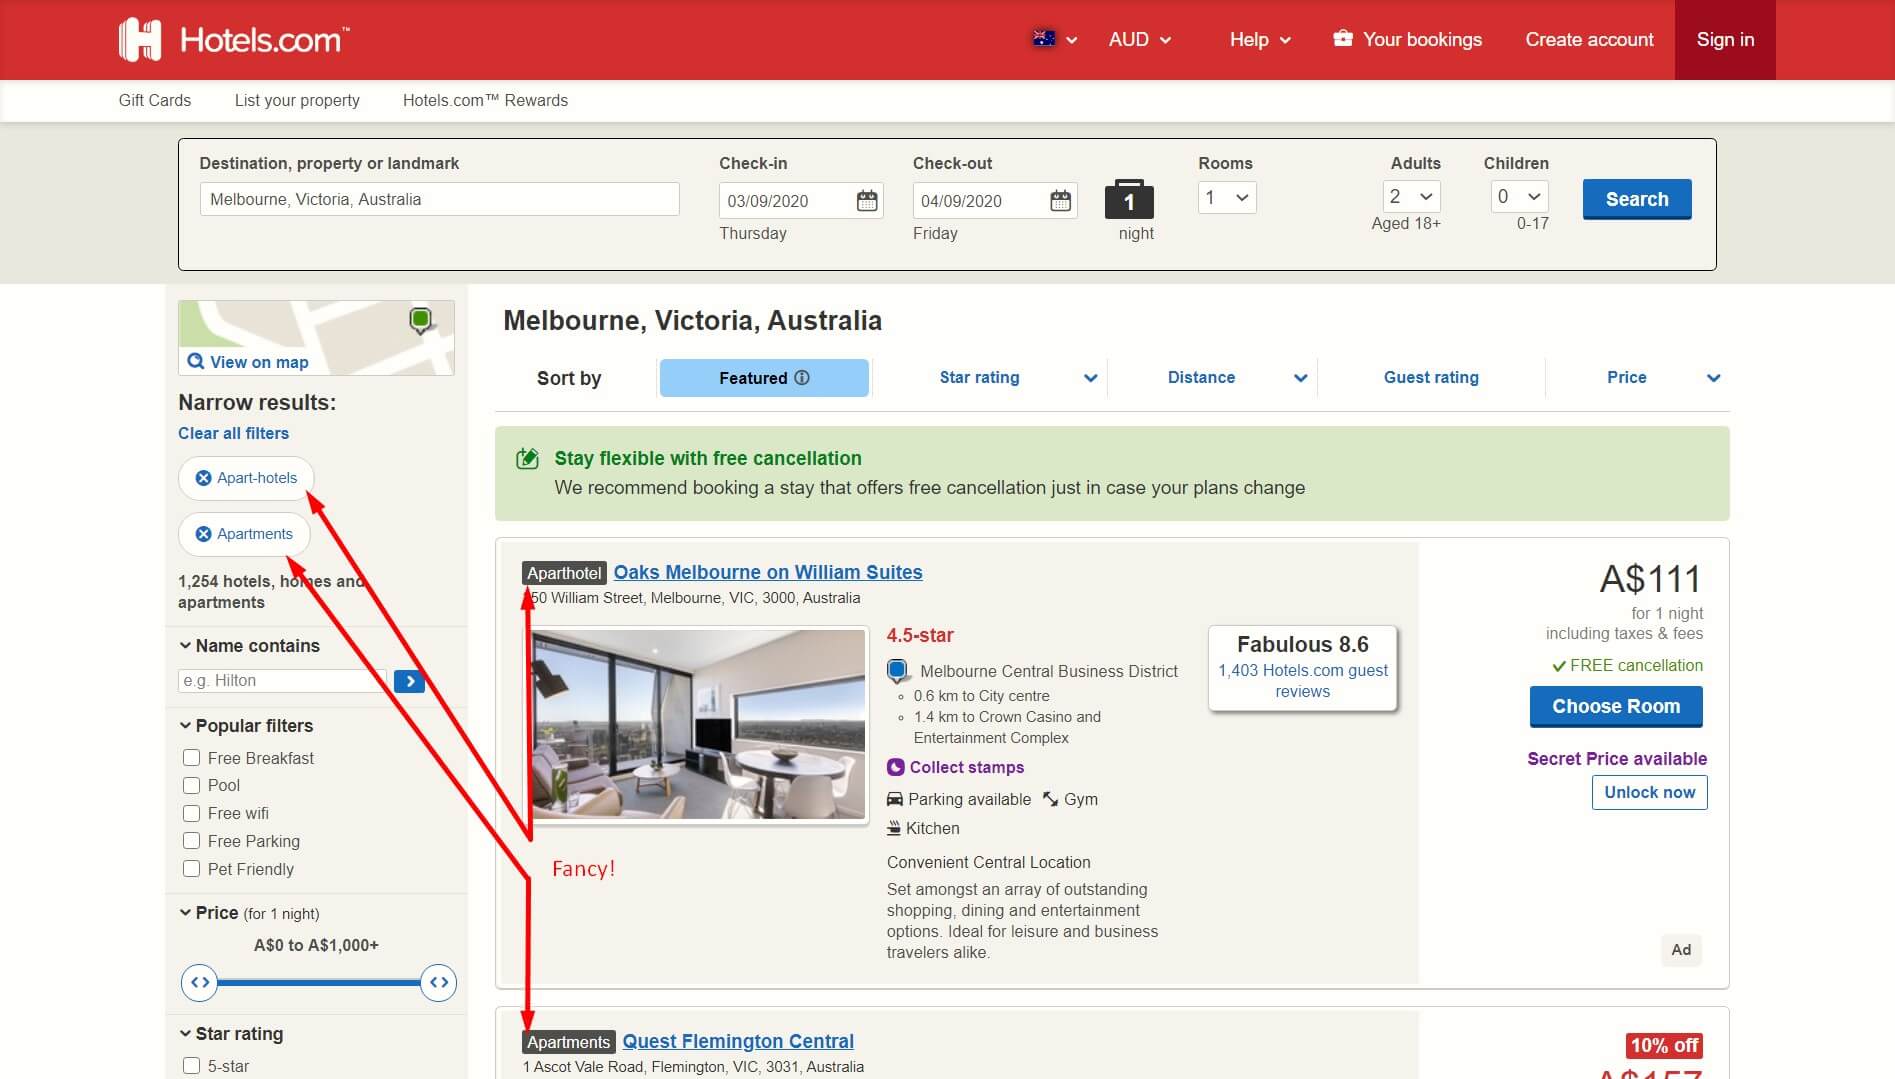 Hotels.com search page - another major accommodation site doing things like Airbnb